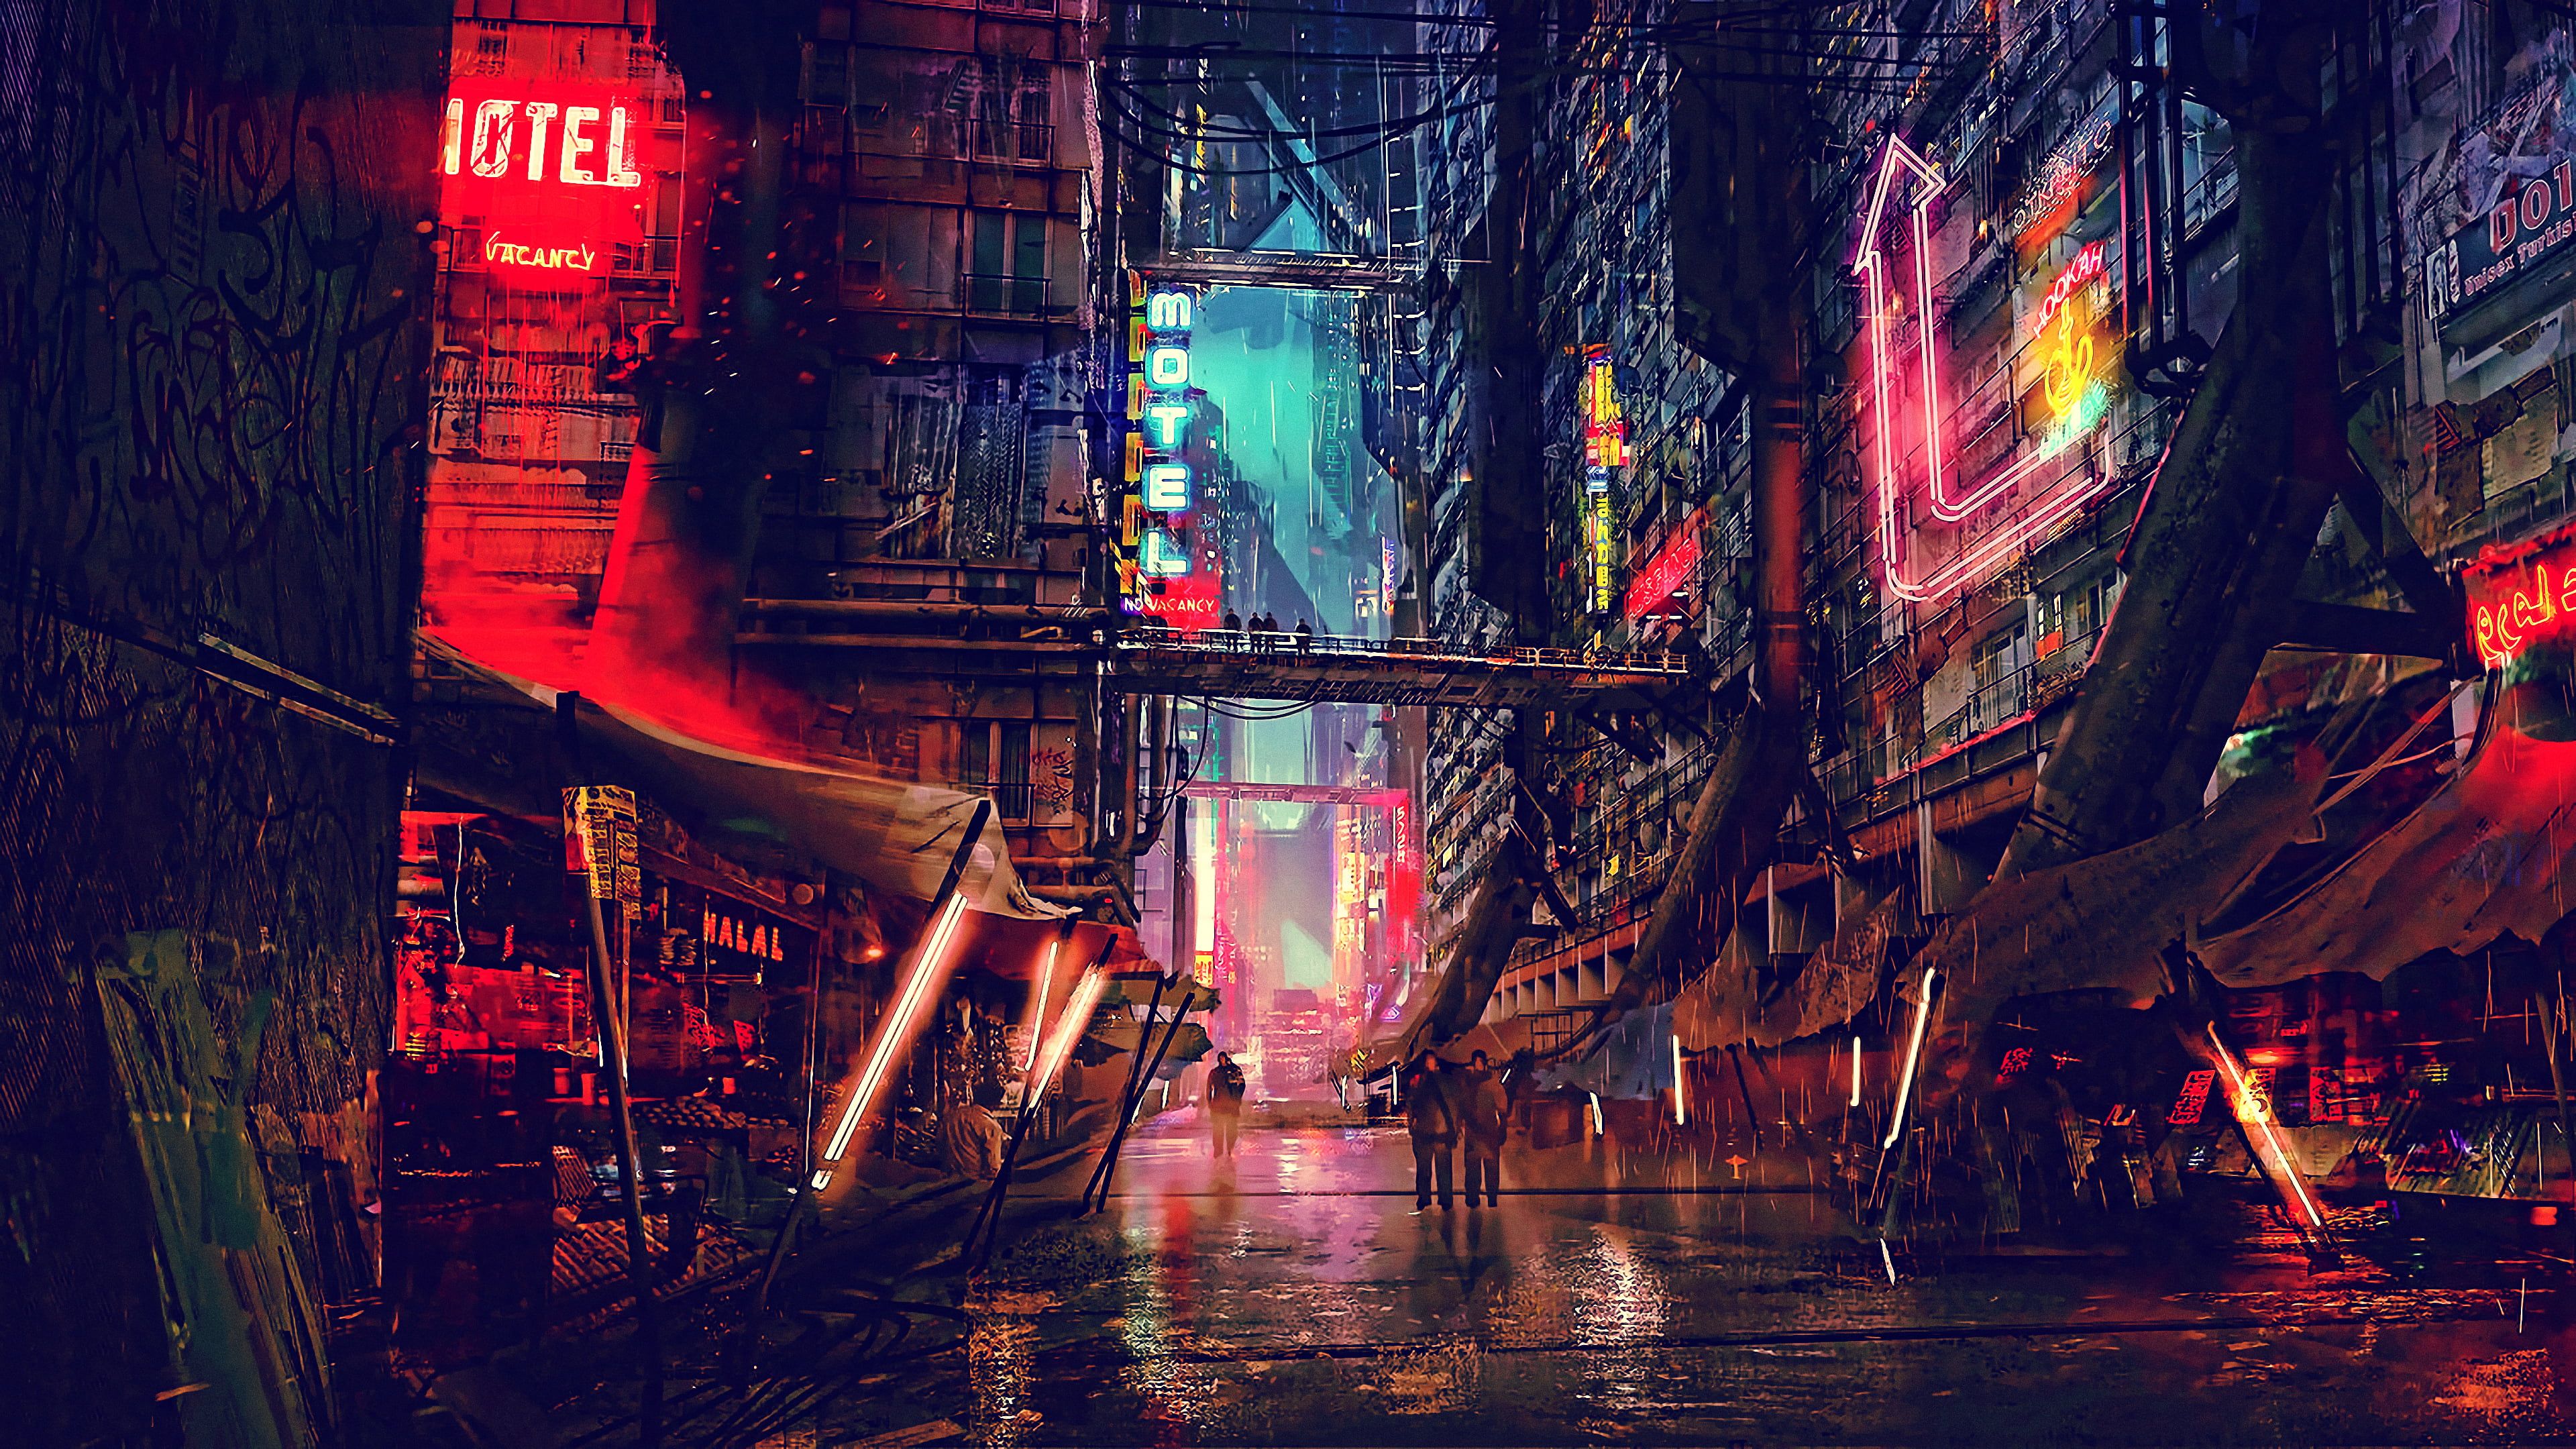 Futuristic cyberpunk cityscape at night with neon red lights reflecting on wet streets, creating a sci-fi vibe for HD desktop wallpaper.